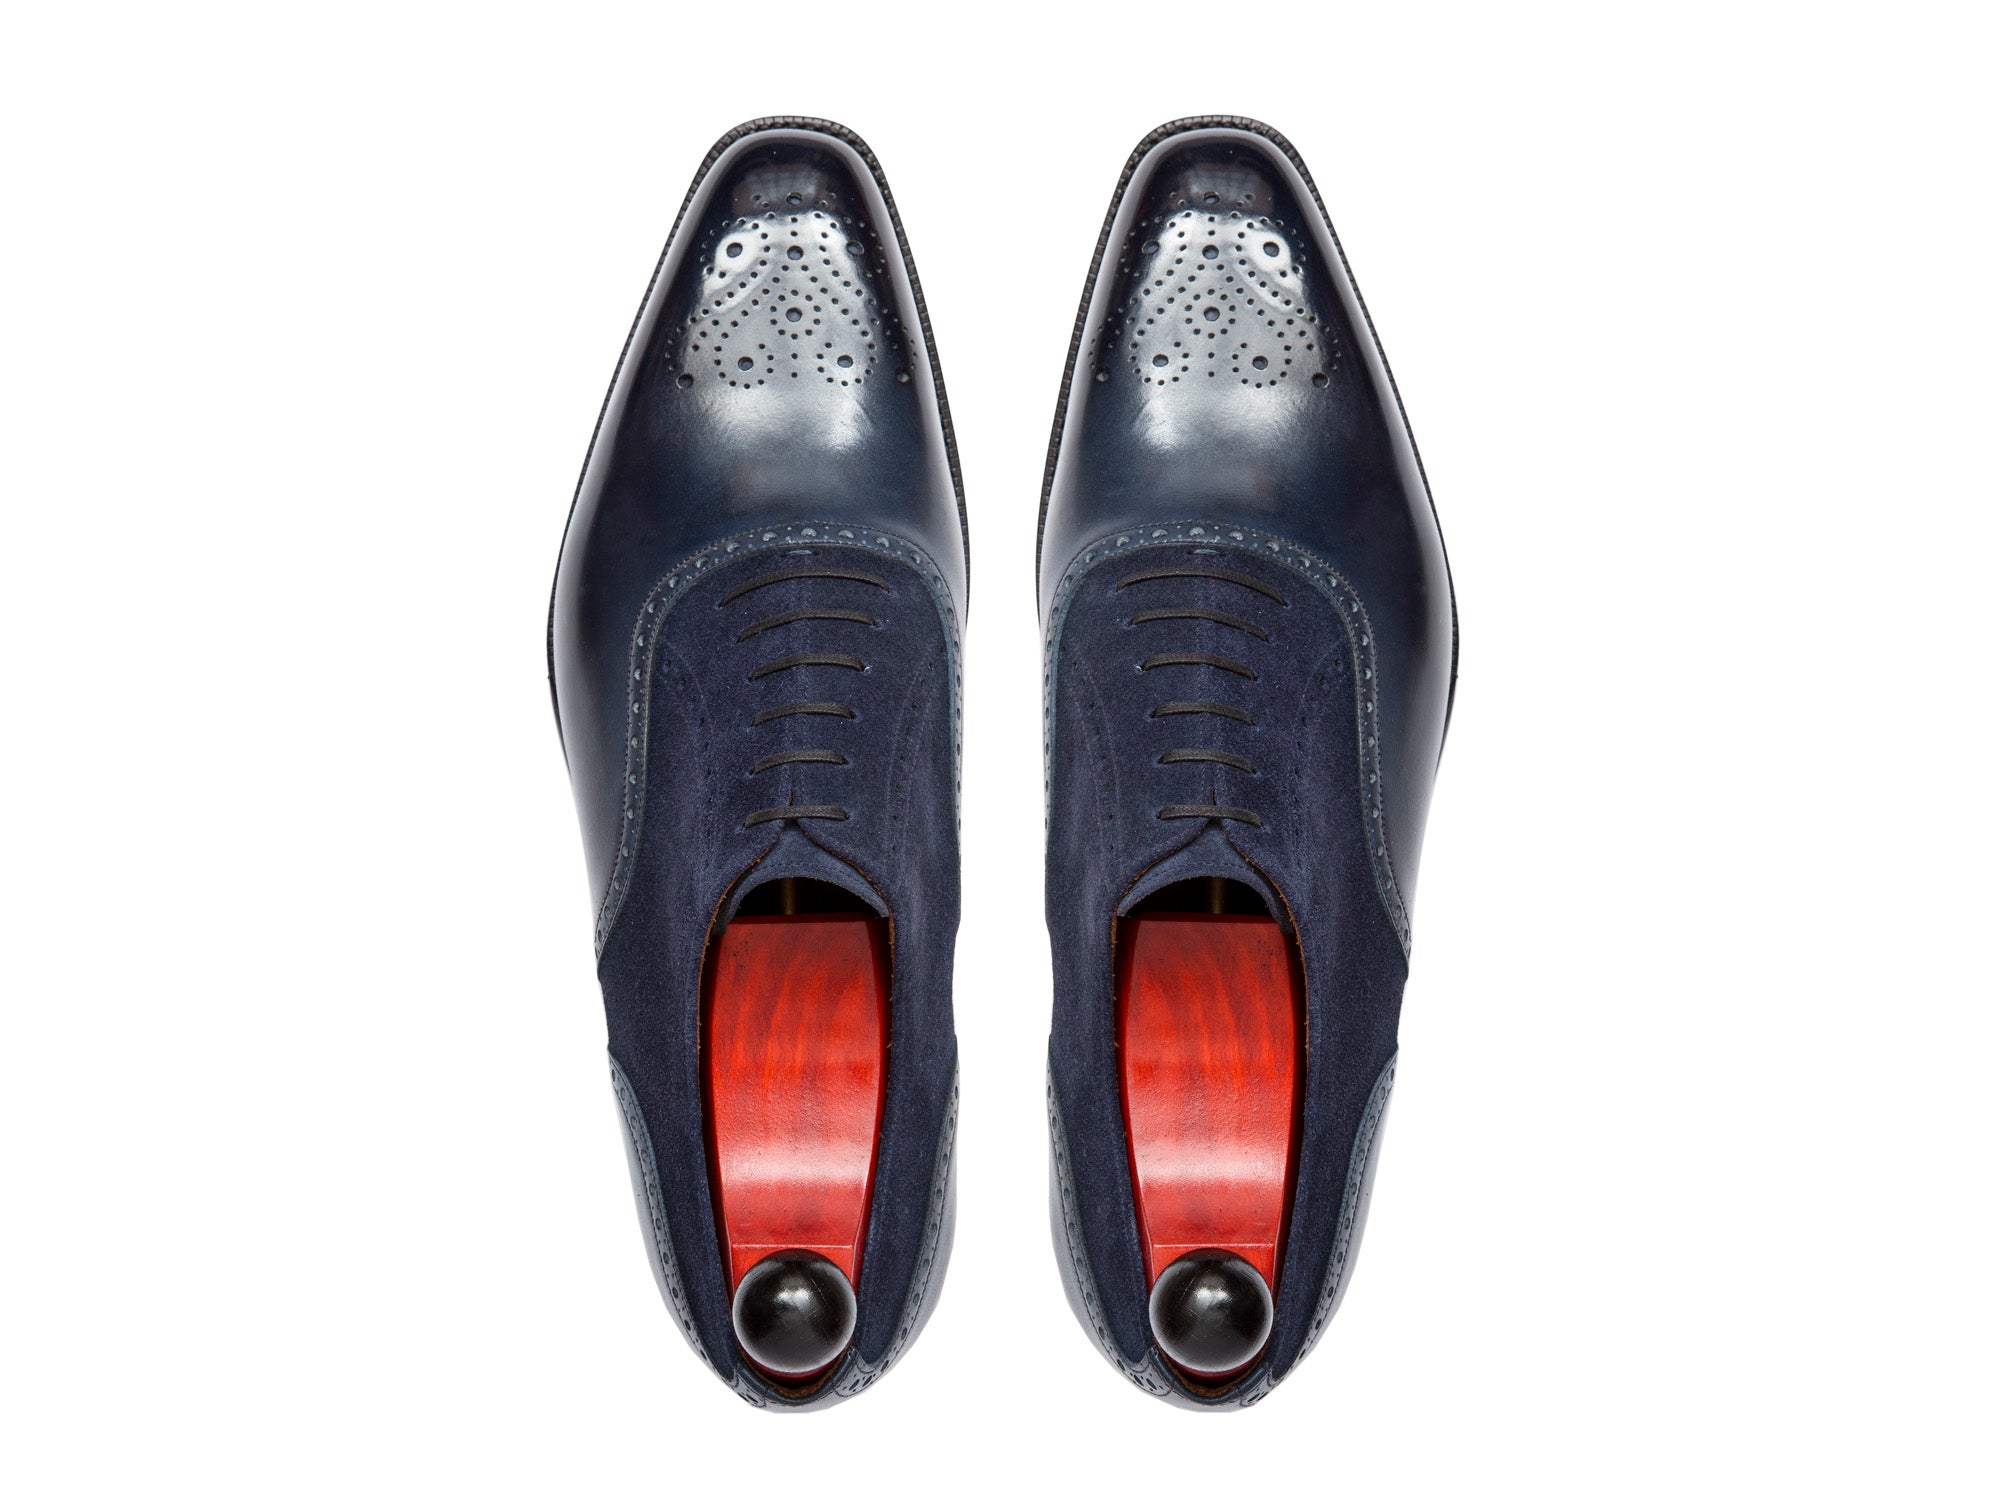 Wallingford - MTO - Shaded Navy Calf / Navy Suede - LPB Last - Single Leather Sole